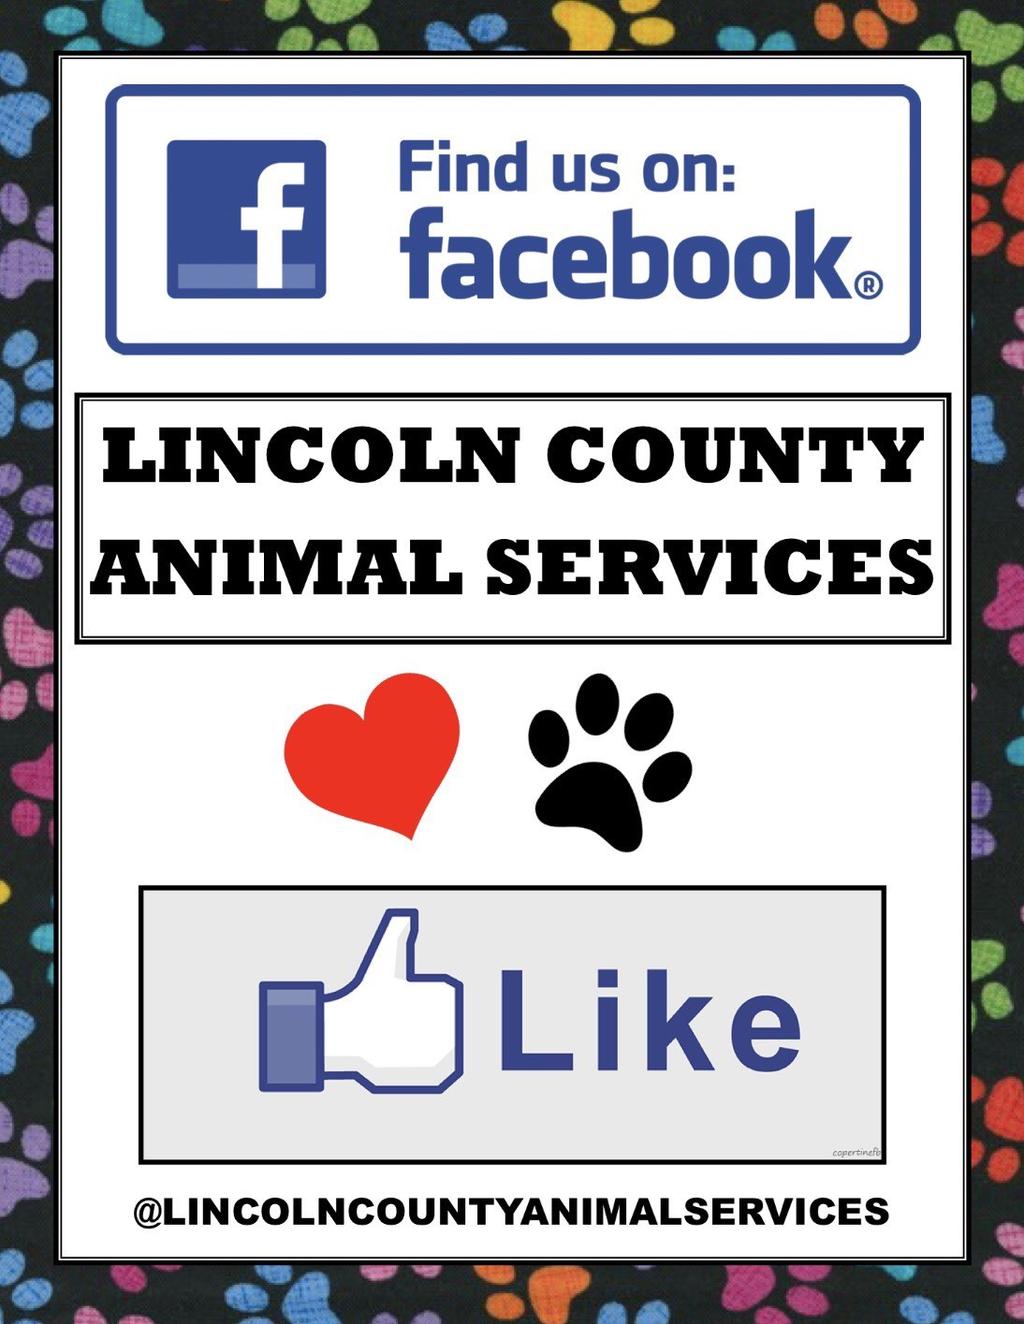 UPCOMING EVENTS 4/22 Earth Day Animal Services Downtown Lincolnton, 11-3pm 4/29 Make Every Day Earth Day Animal Services Info Booth at Habitat Restore, 10-2pm 5/6 Rabies Clinic East Lincoln Middle